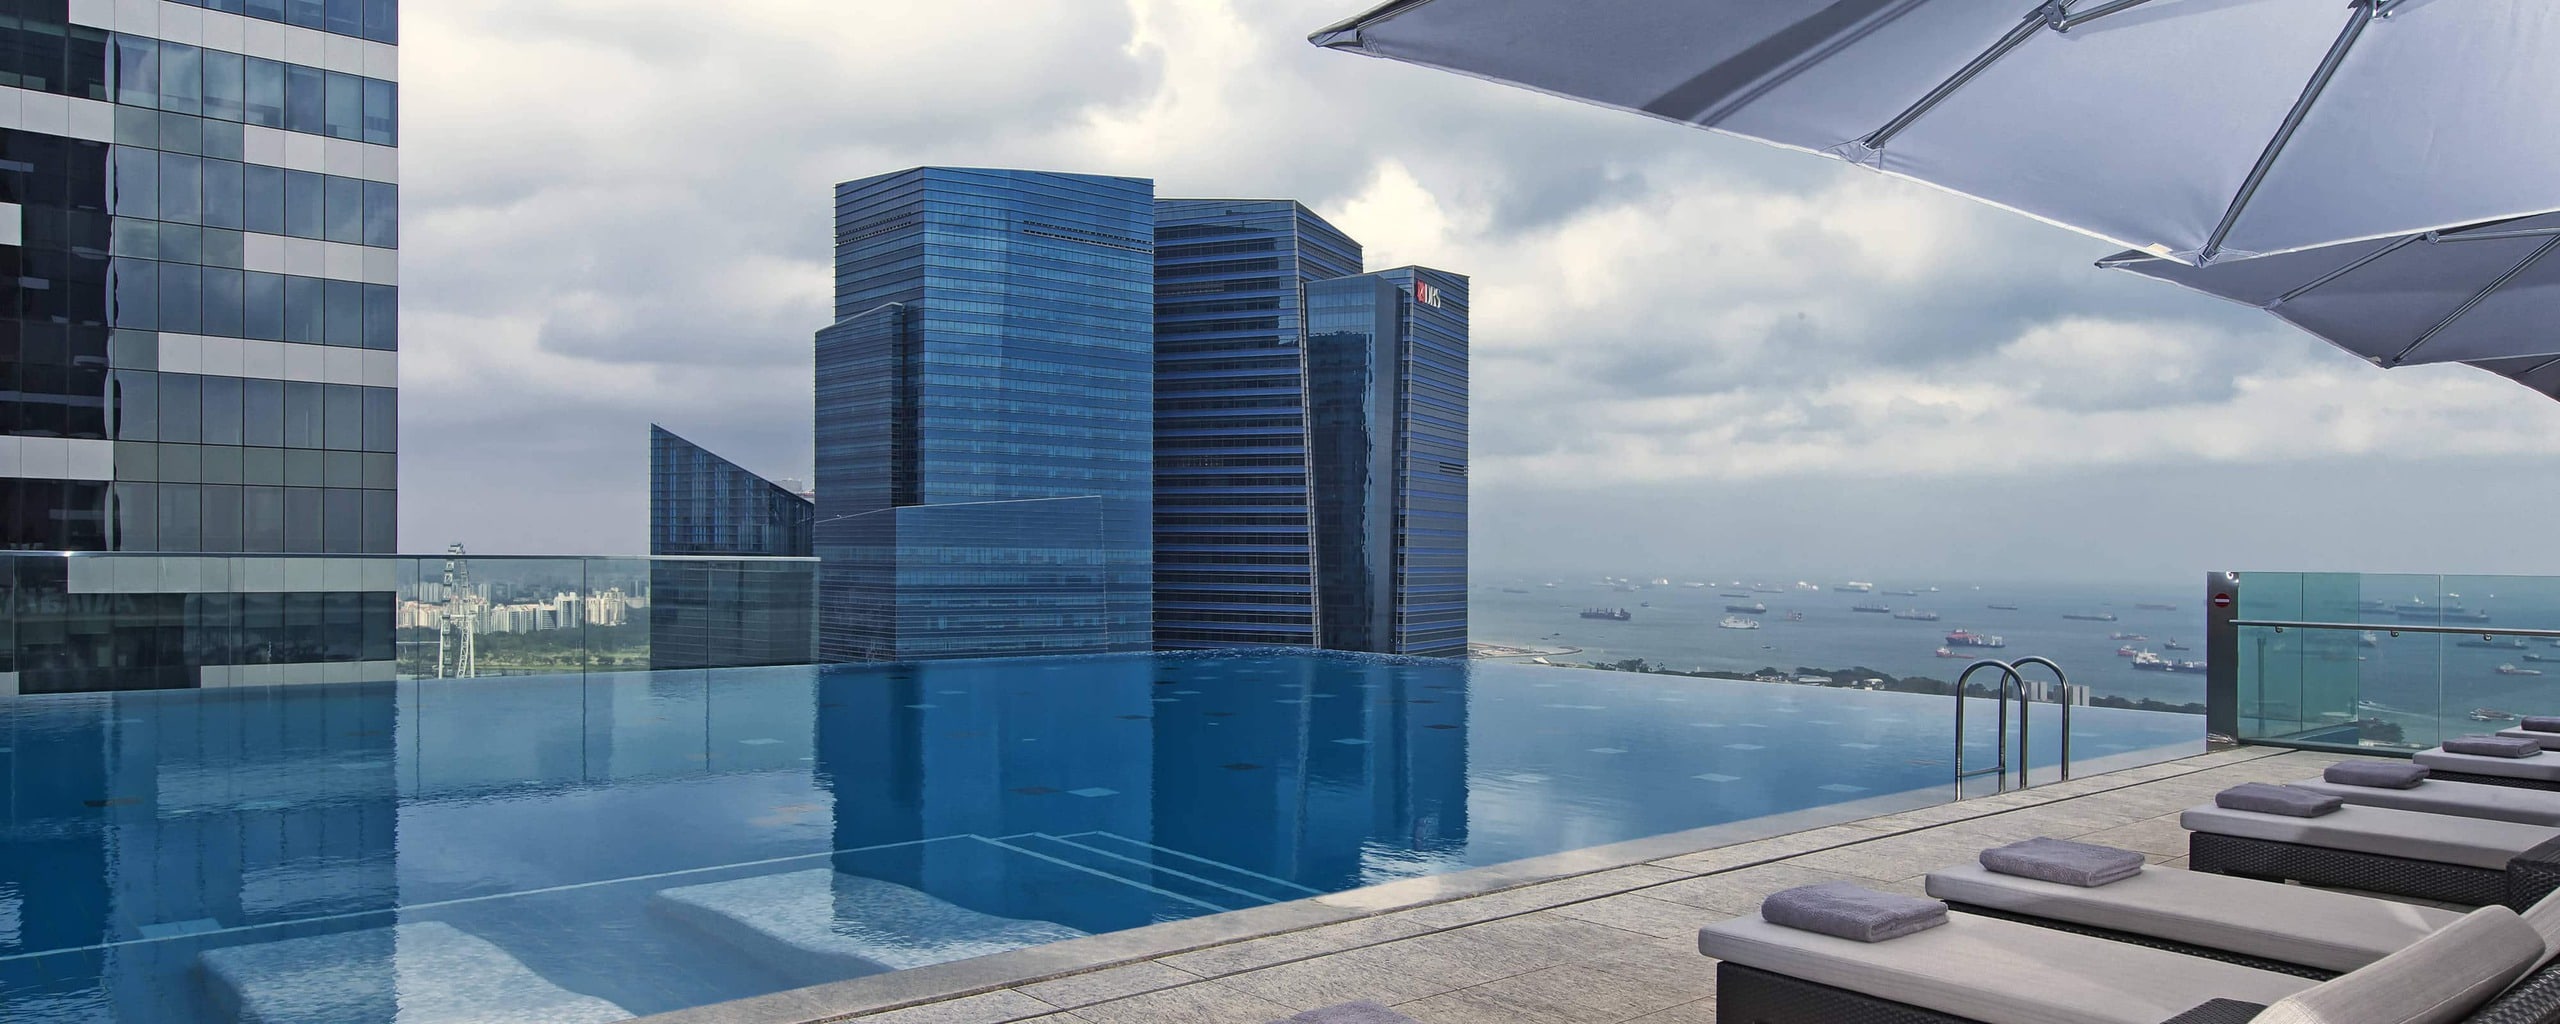 The Westin Singapore rooftop pool